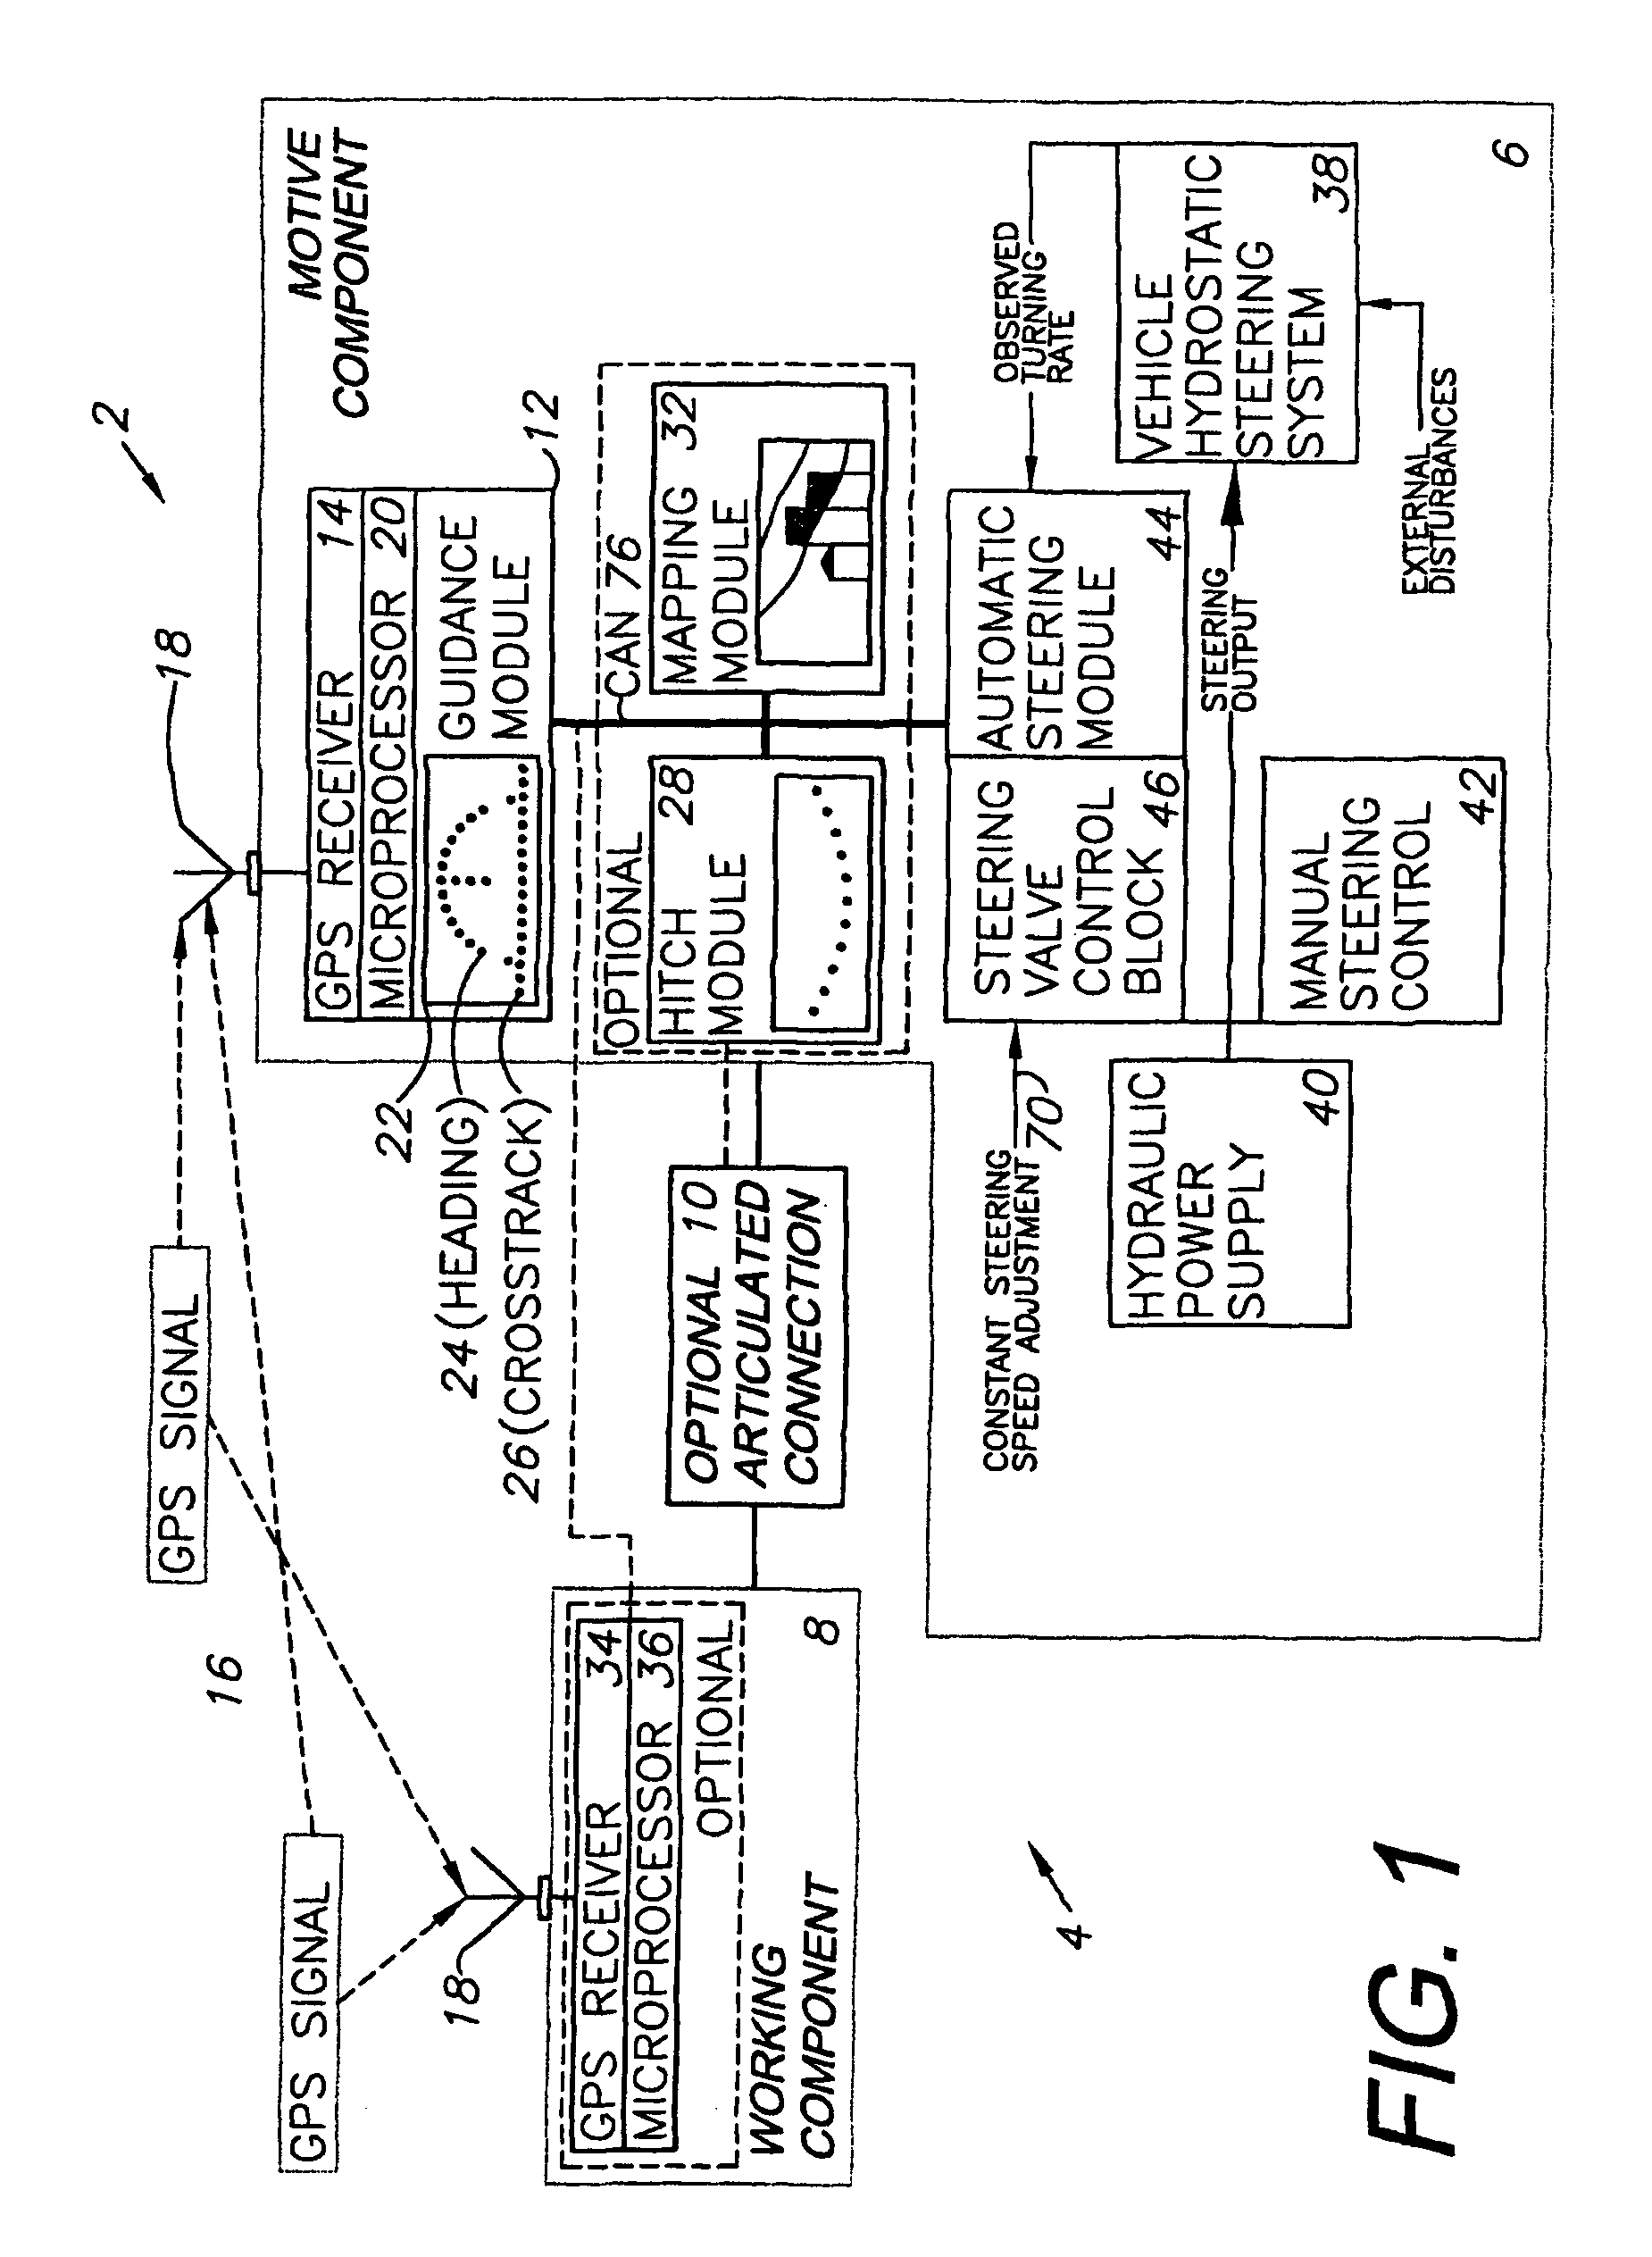 Automatic steering system and method